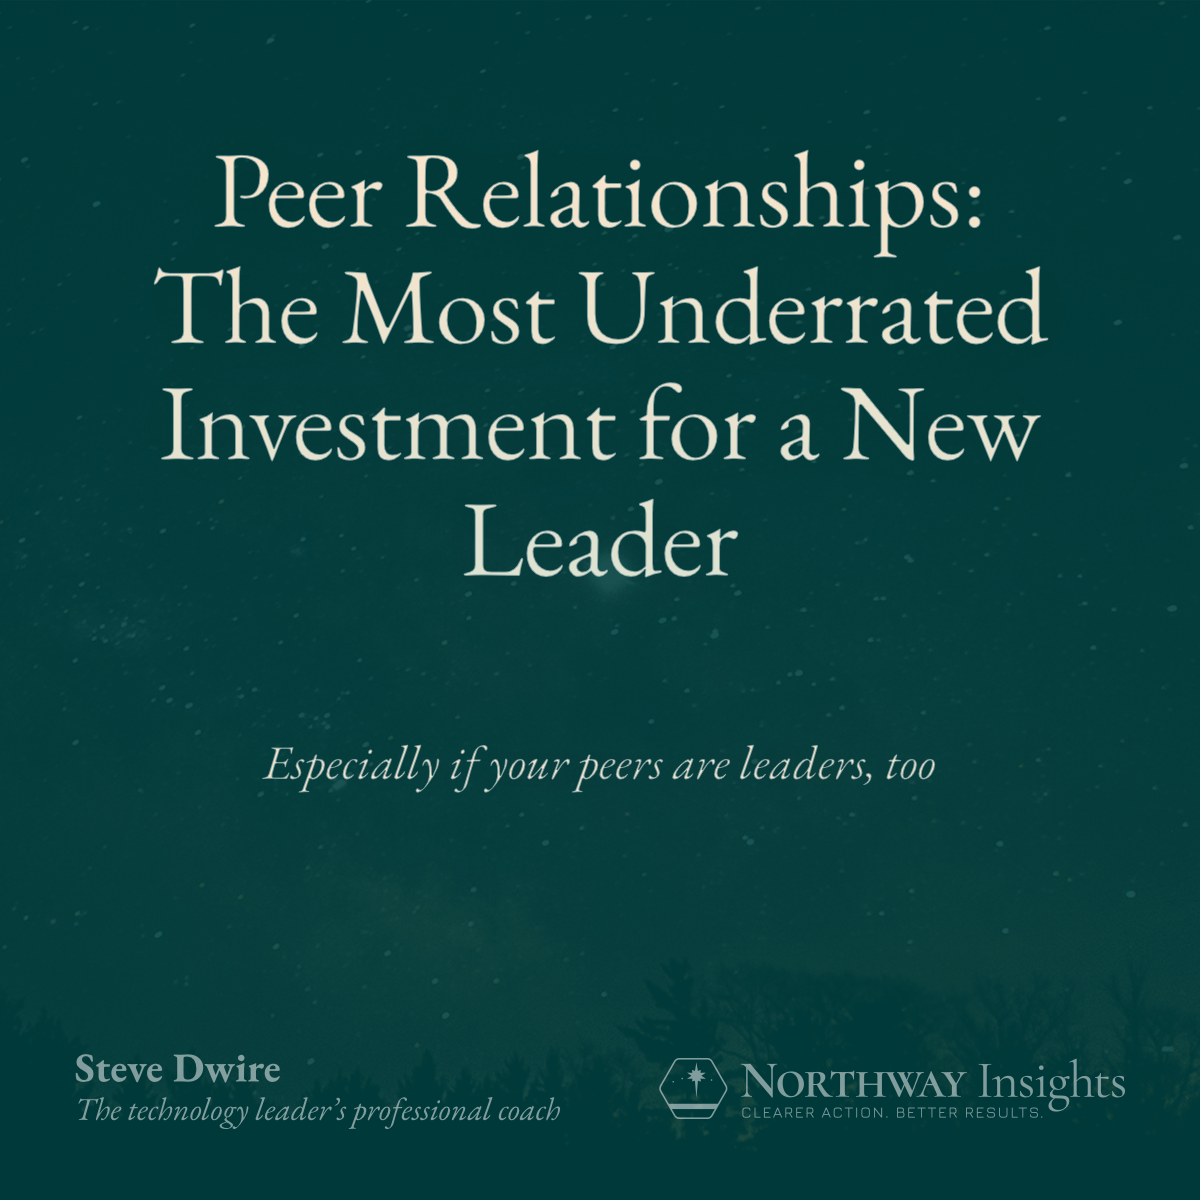 Peer Relationships: The Most Underrated Investment for a New Leader (especially if your peers are leaders, too)